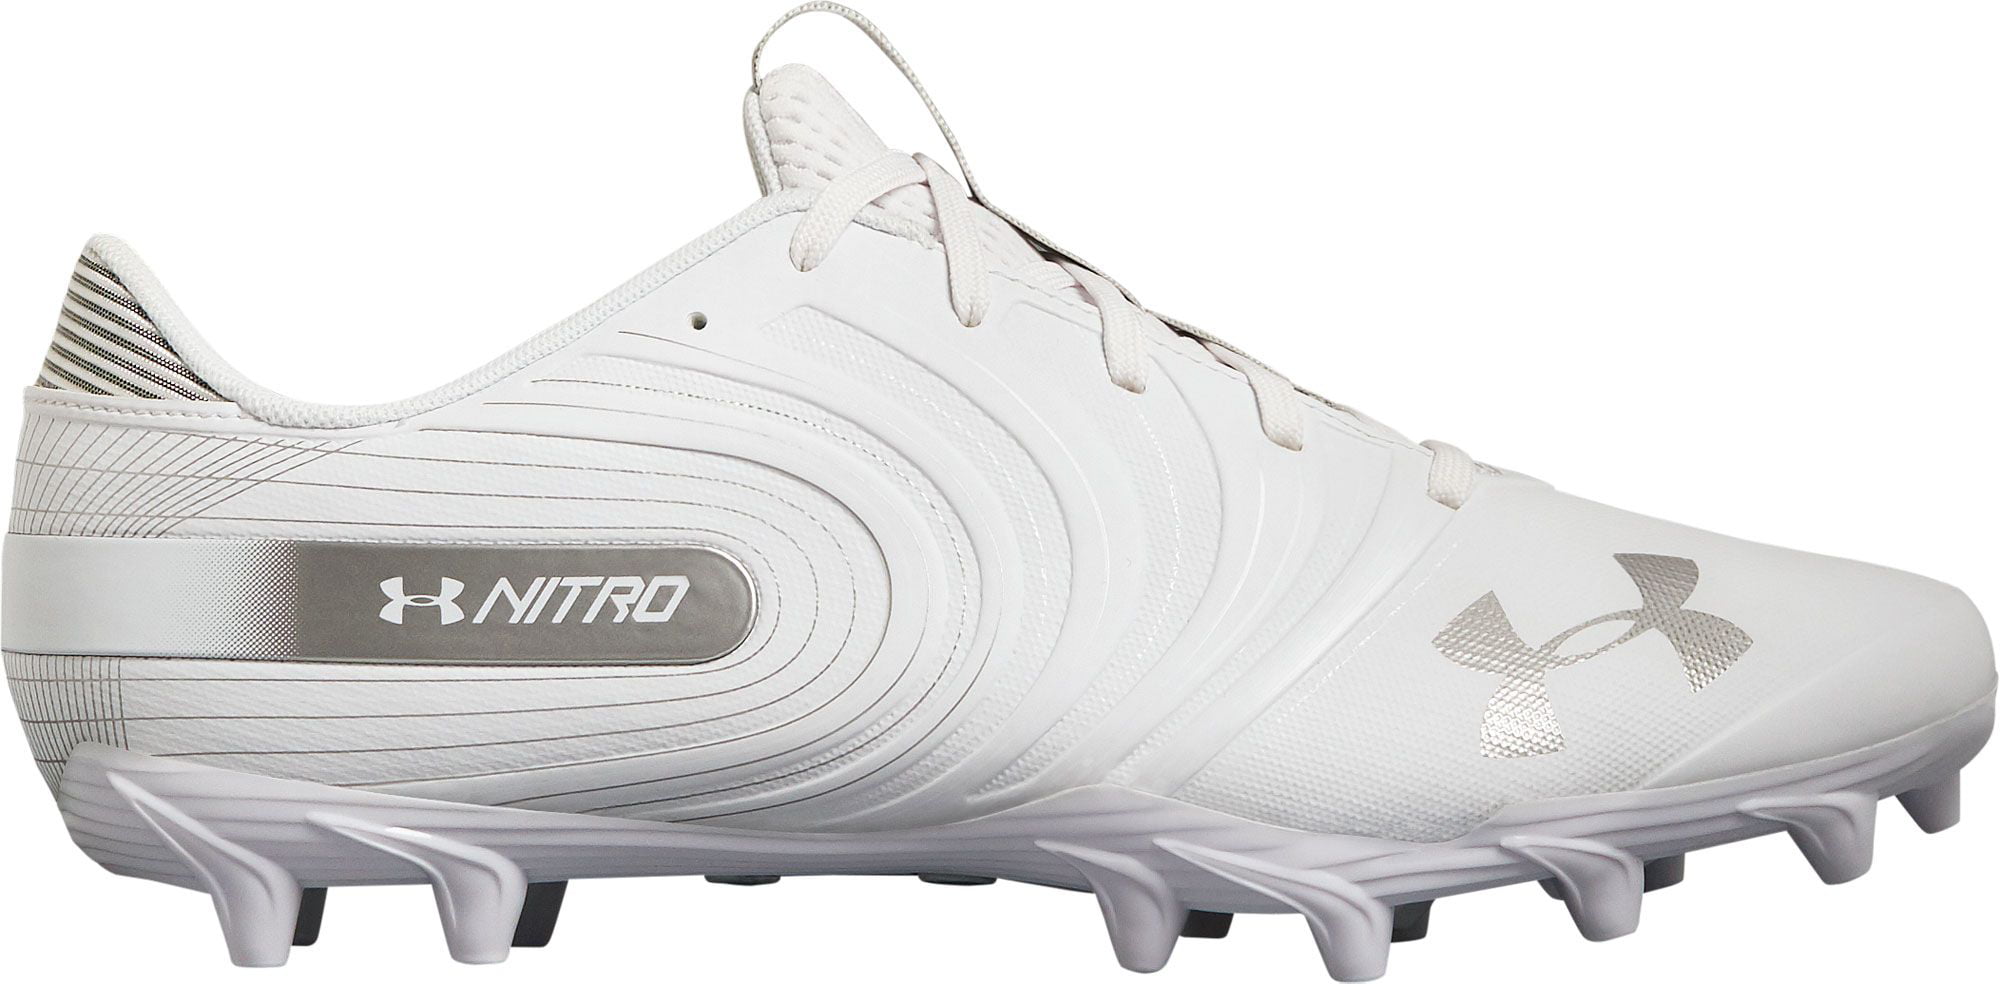 under armour nitro wide cleats 